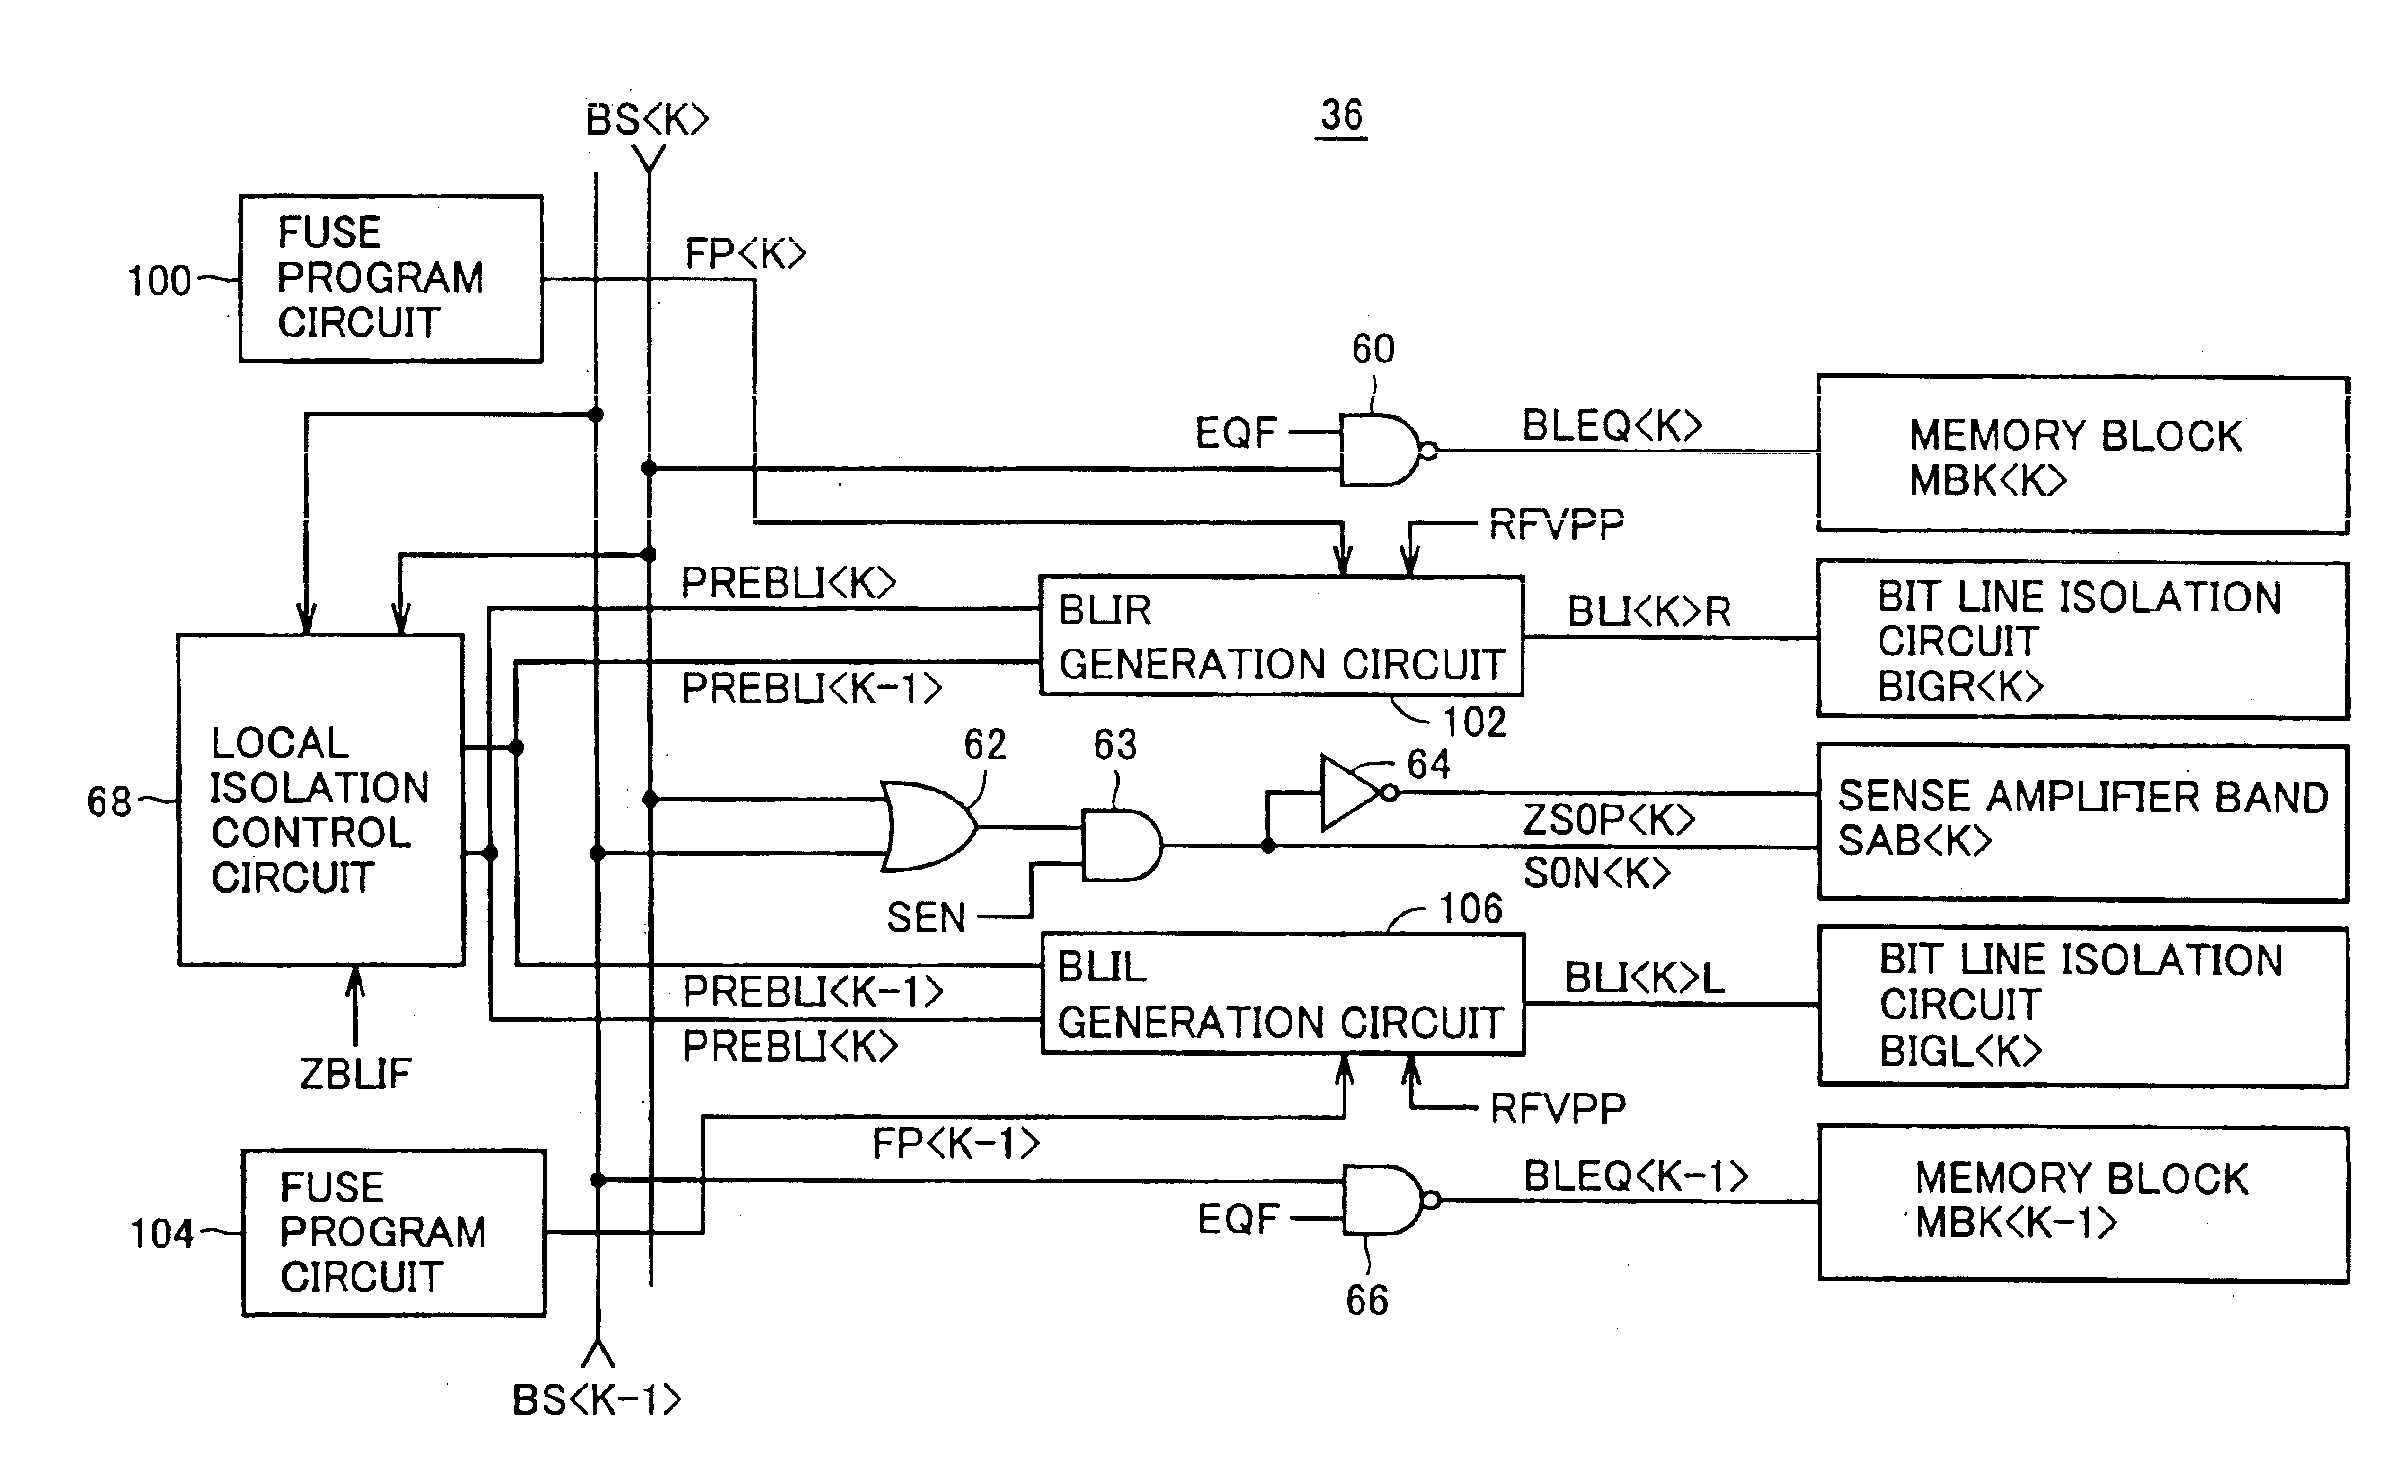 Semiconductor memory device with reduced current consumption during standby state